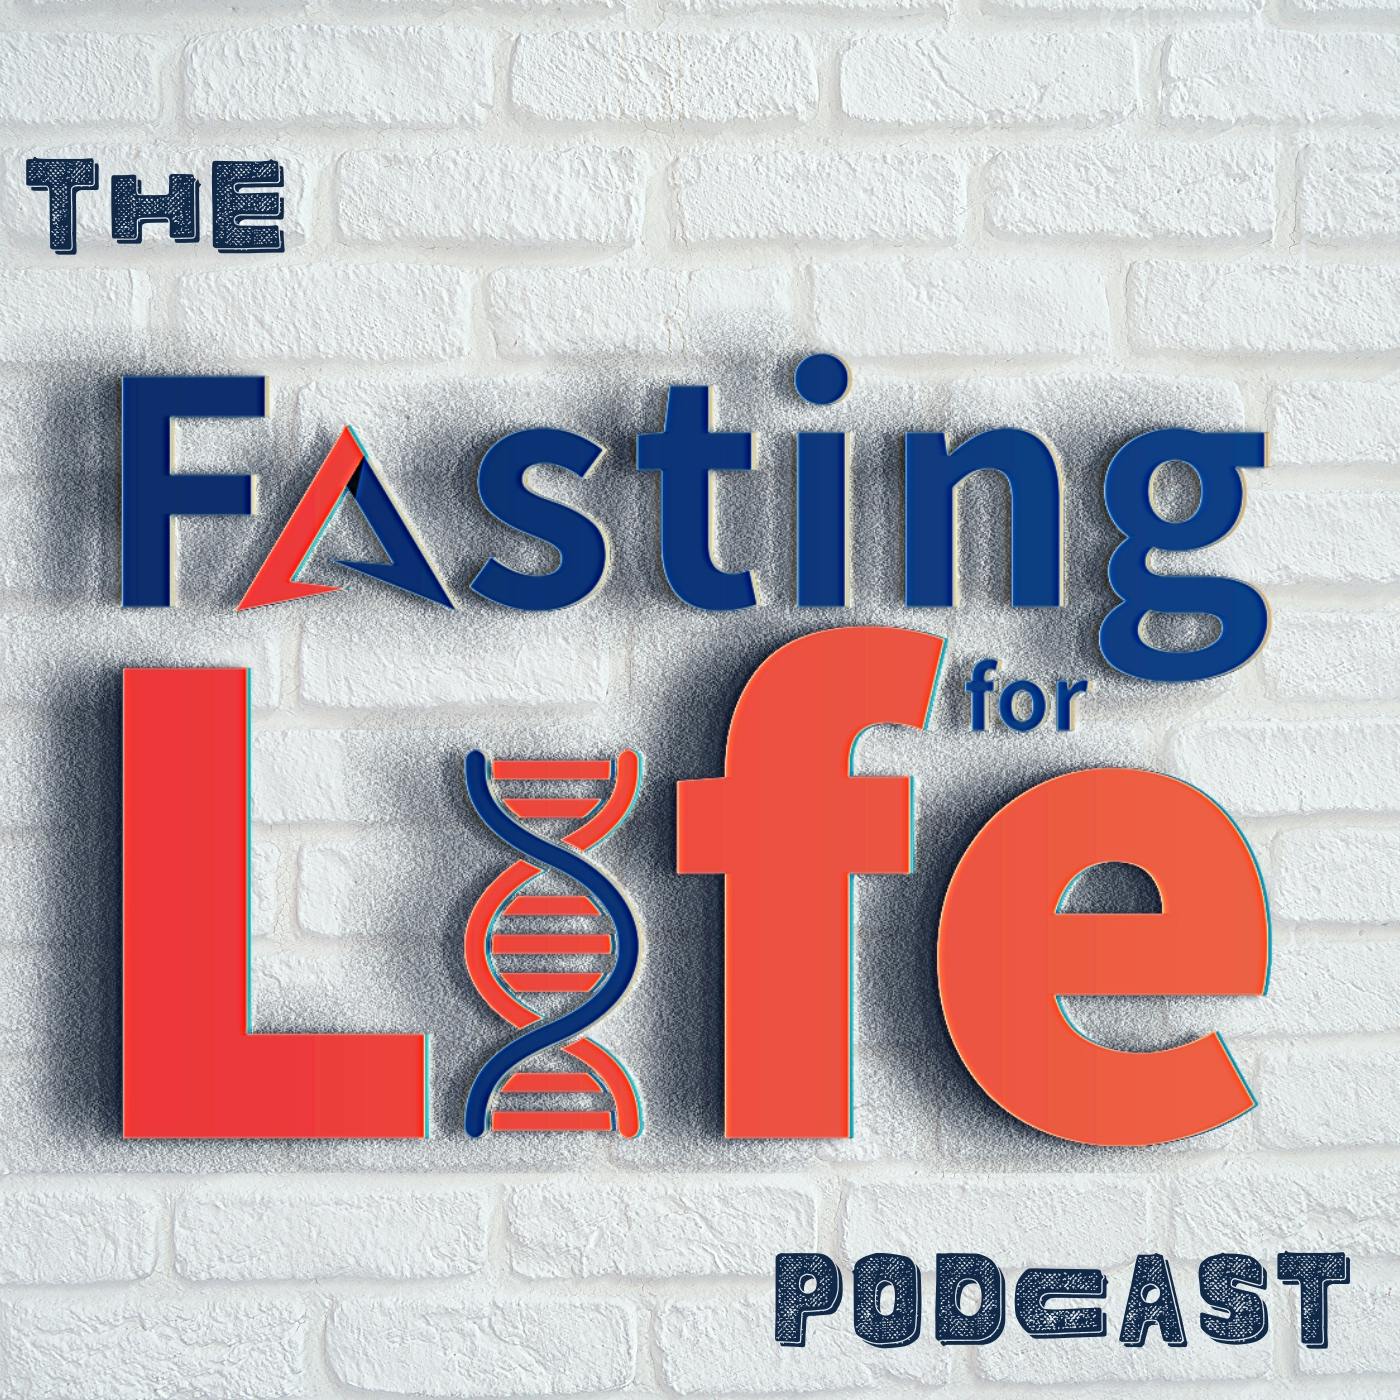 Ep. 154 - Fasting during the Holidays that allows Maximum Enjoyment | Free Intermittent Fasting Plan for OMAD